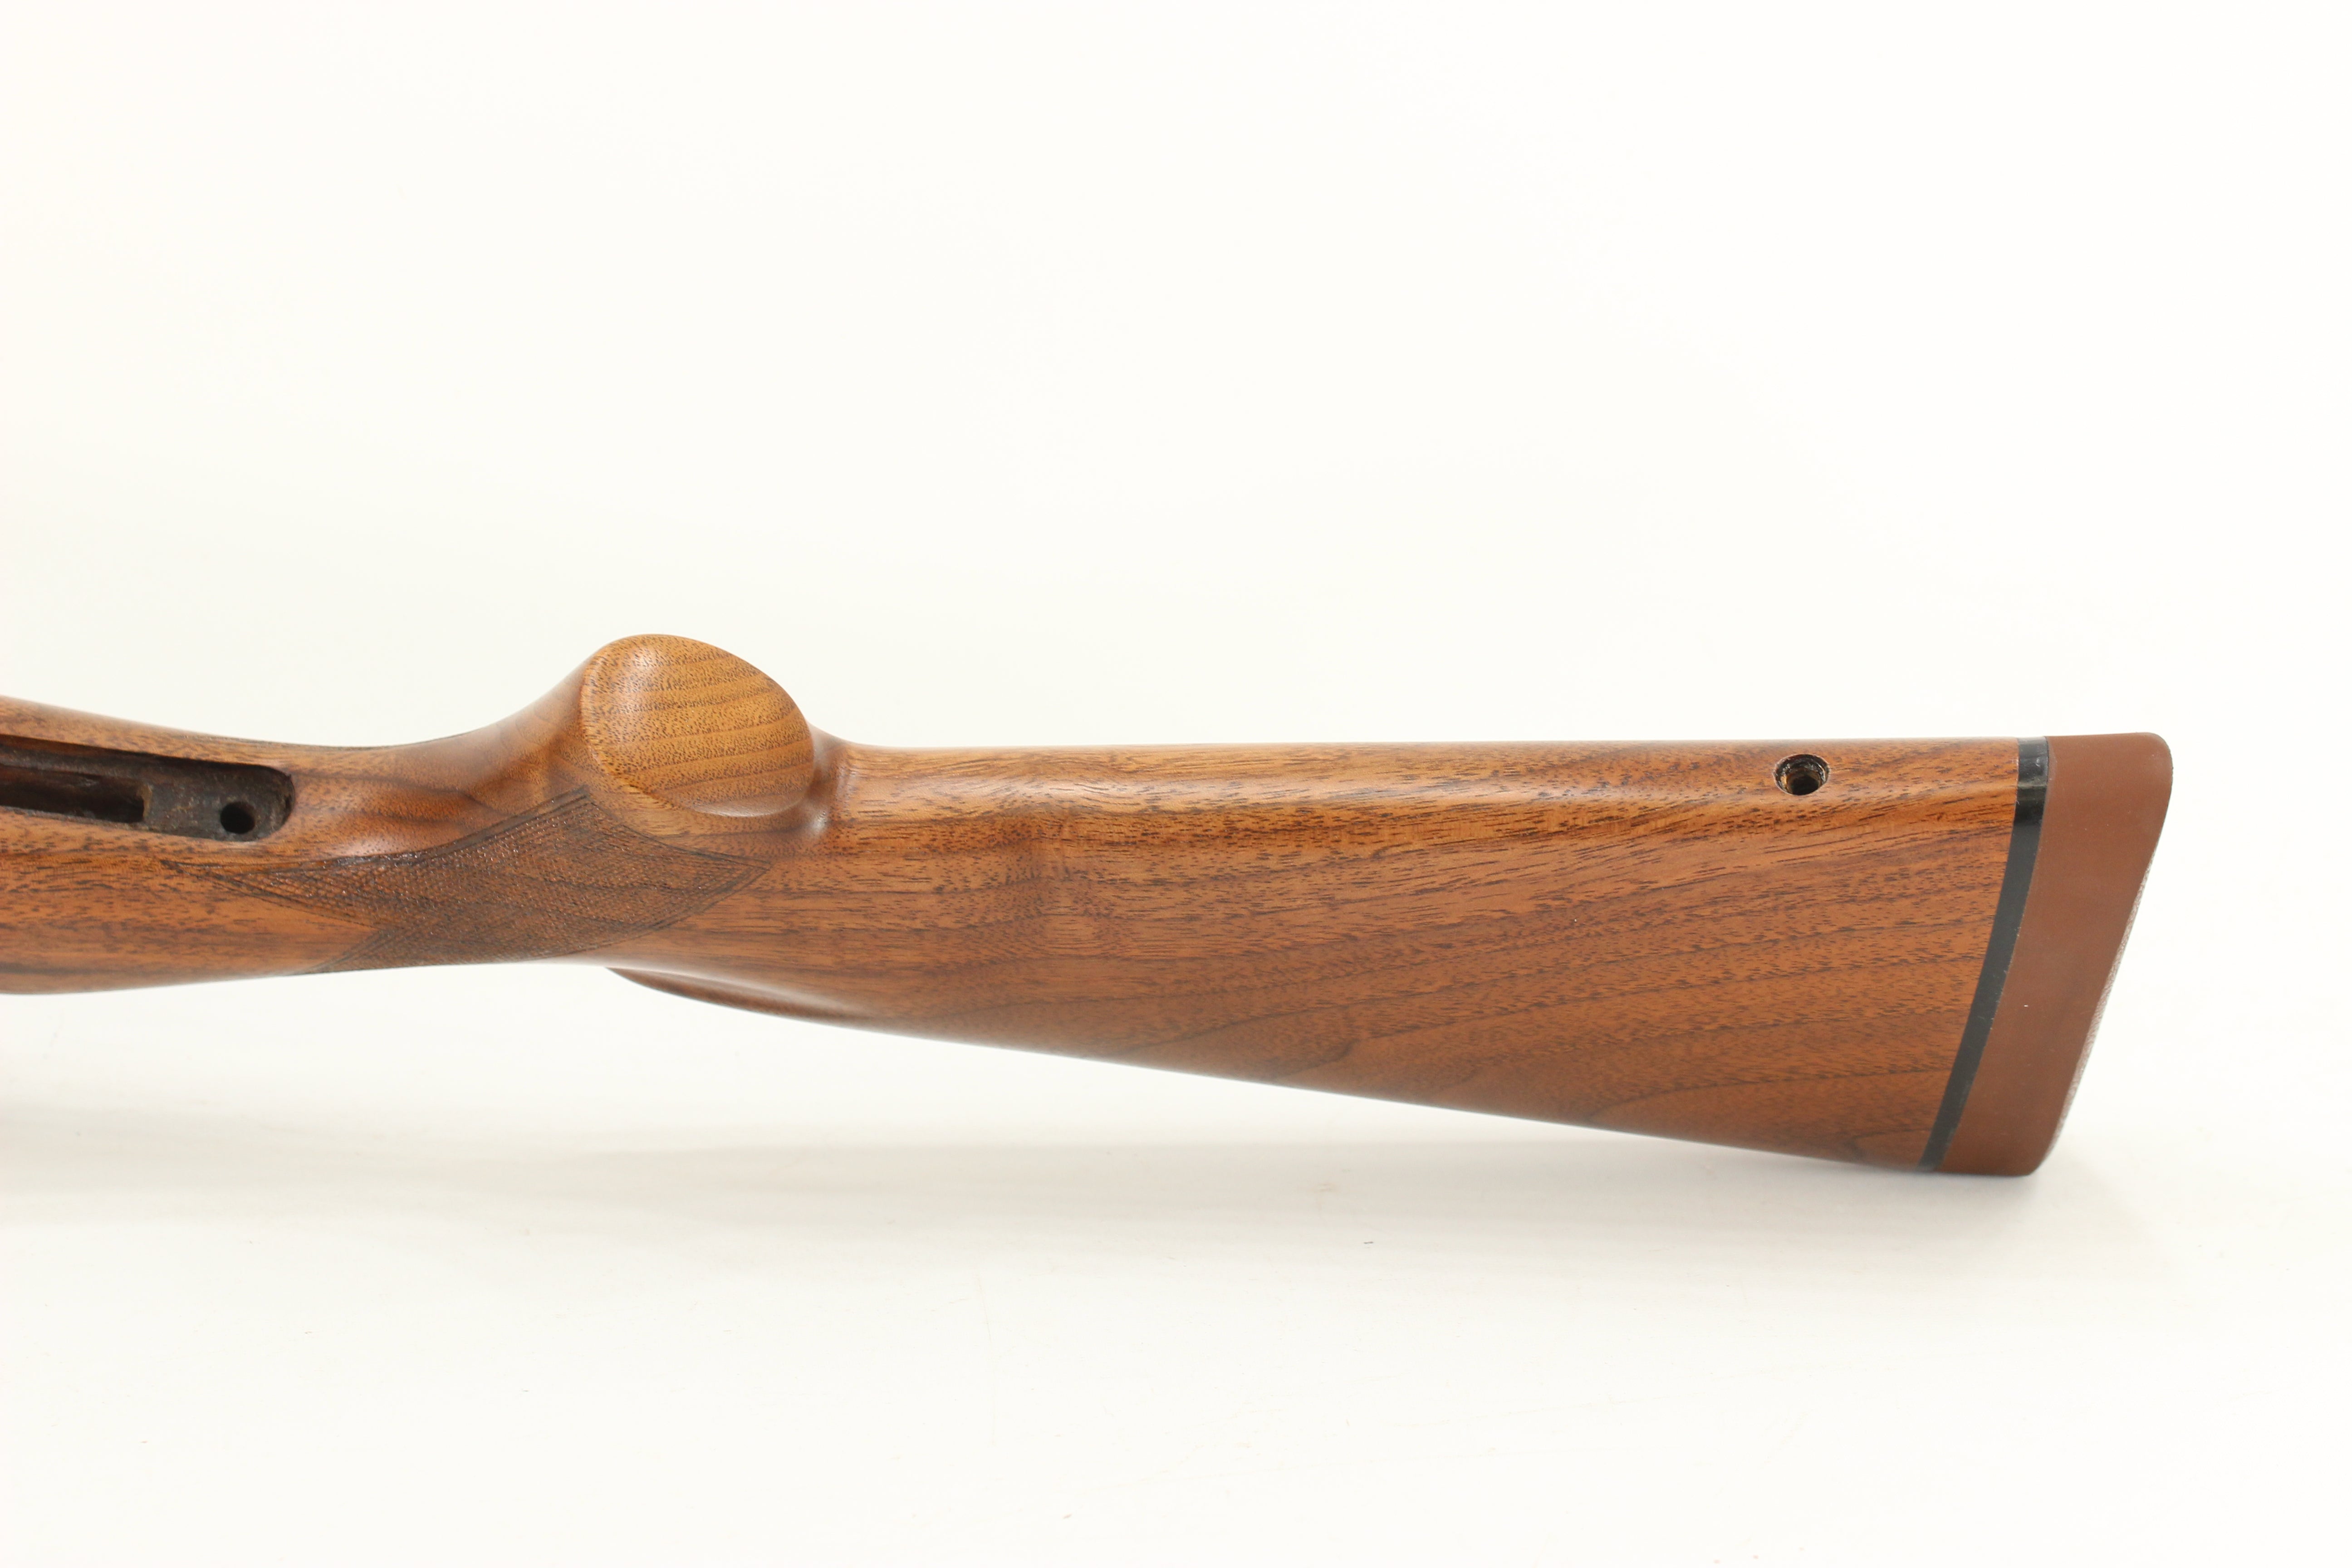 1941-1948 Low Comb Standard Rifle Stock